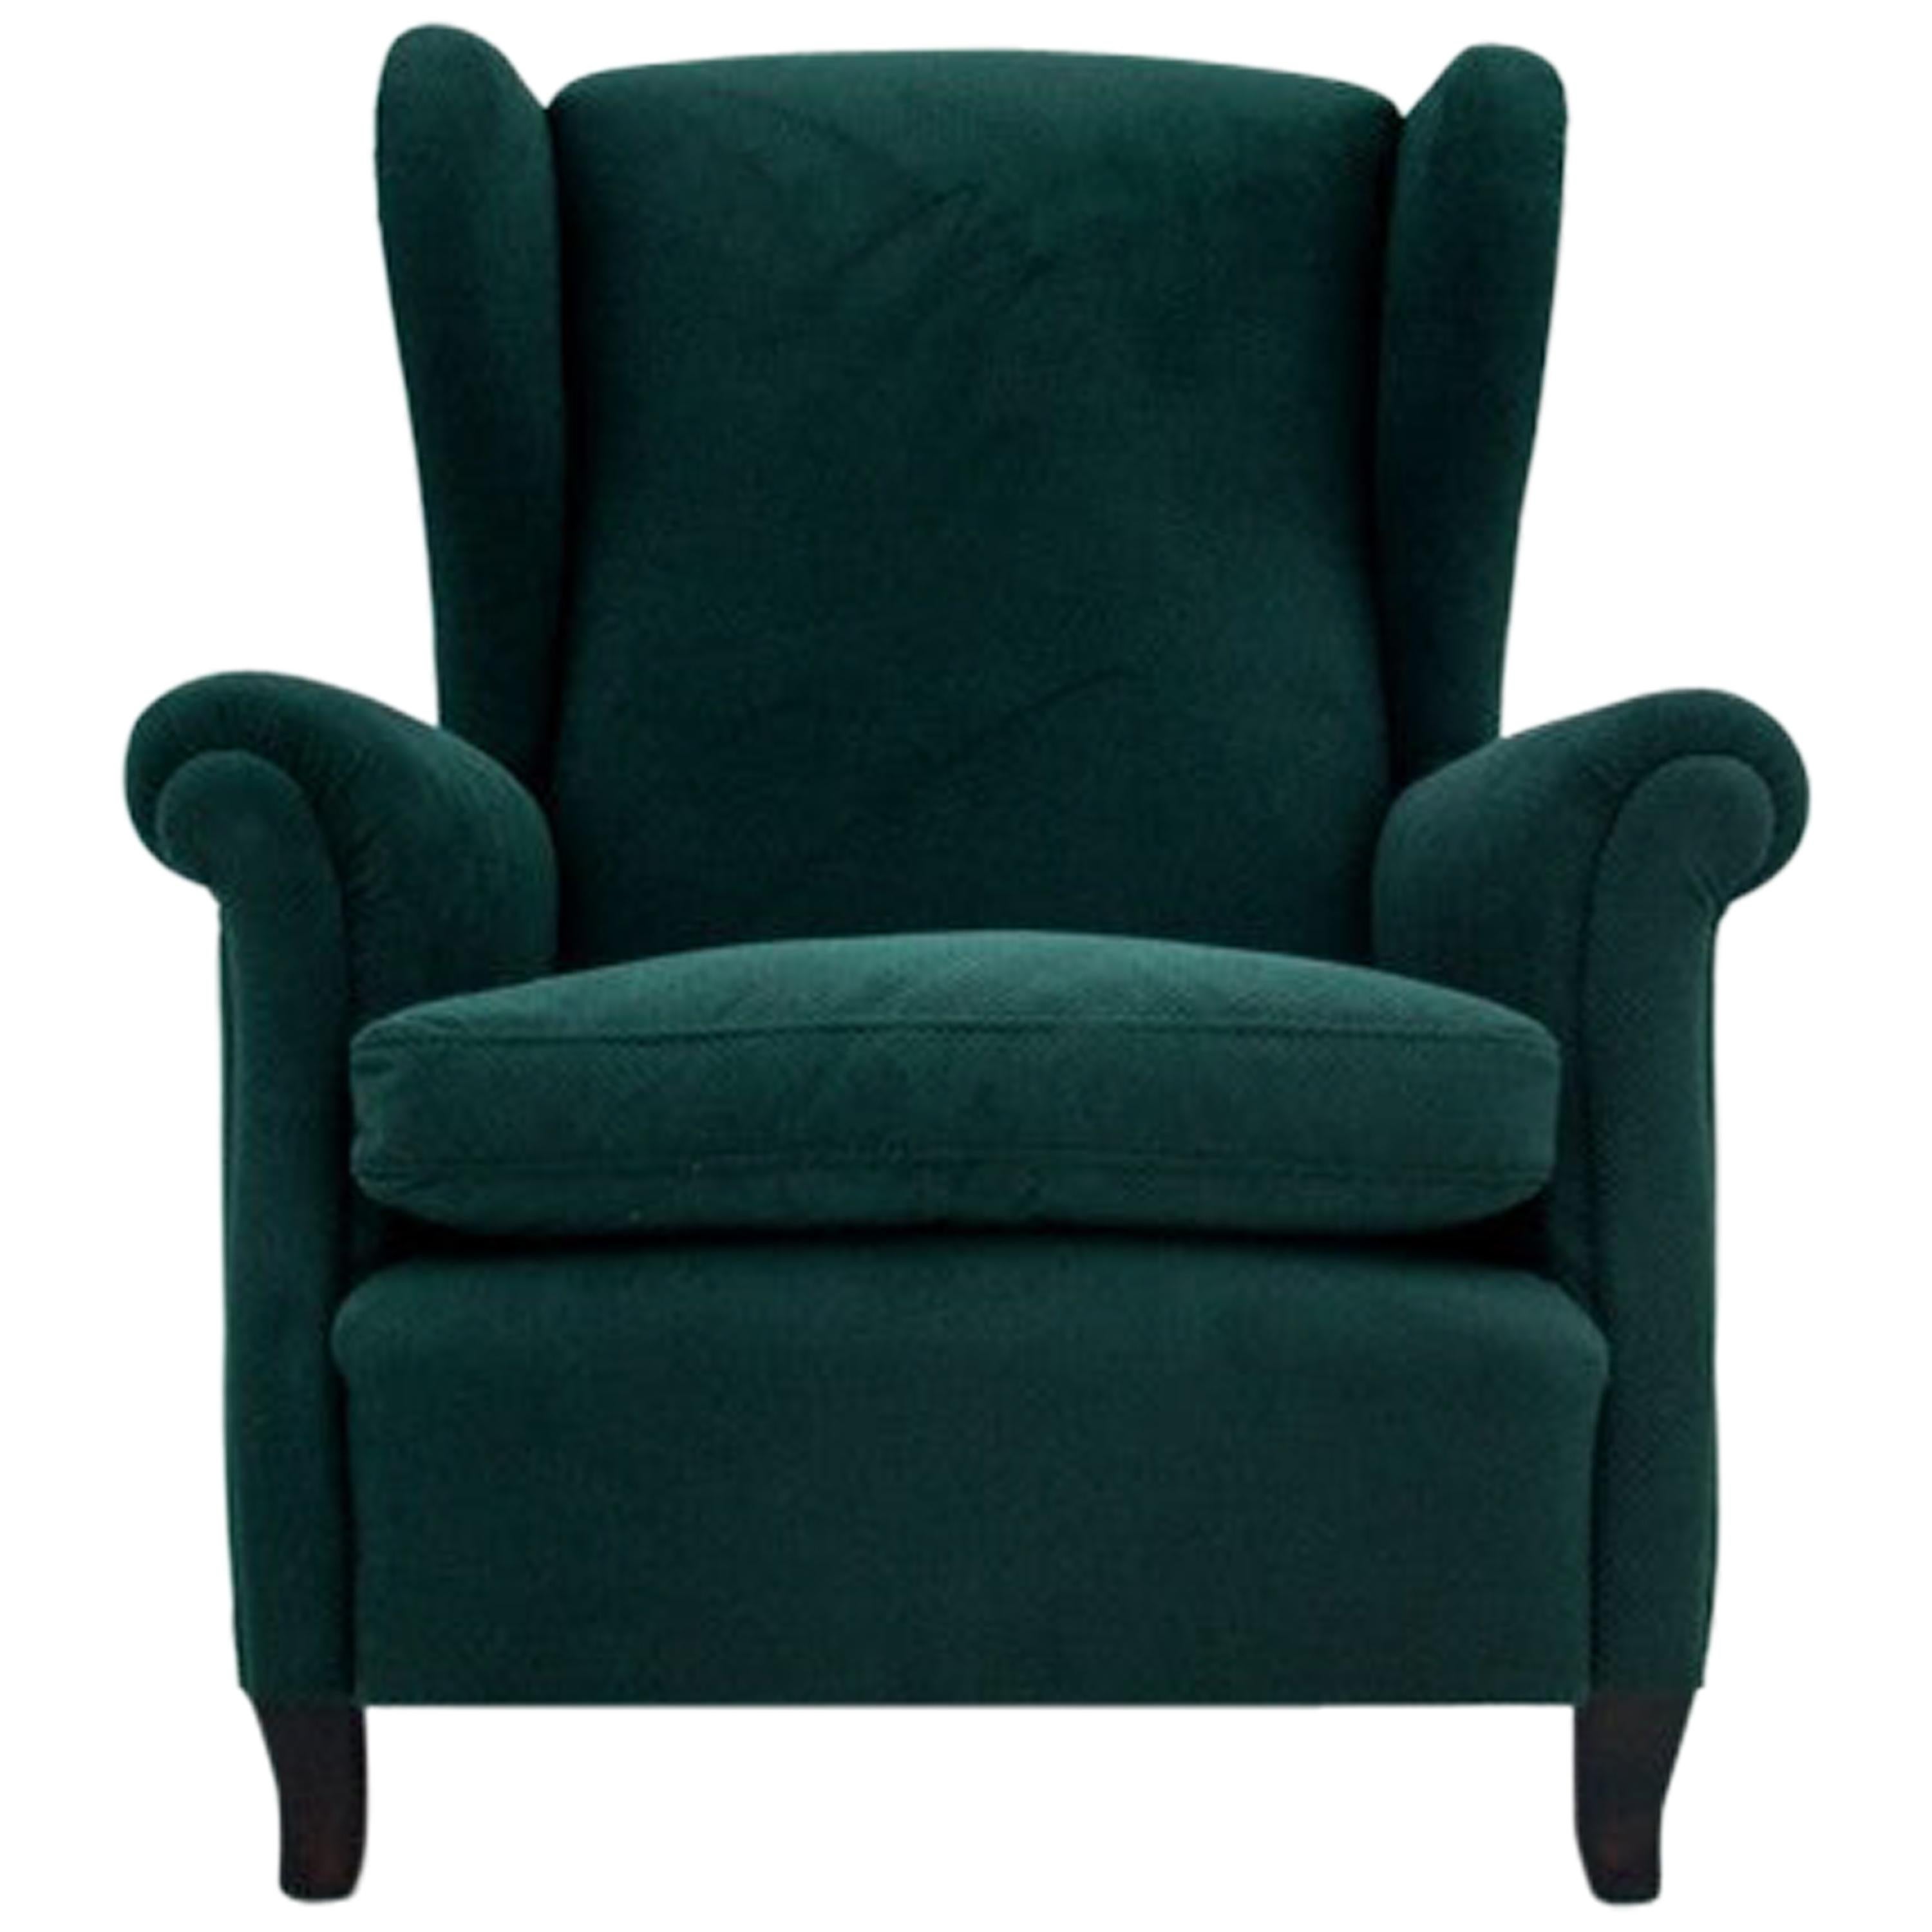 Retro Green Wing Back Armchair, 1960s-1970s